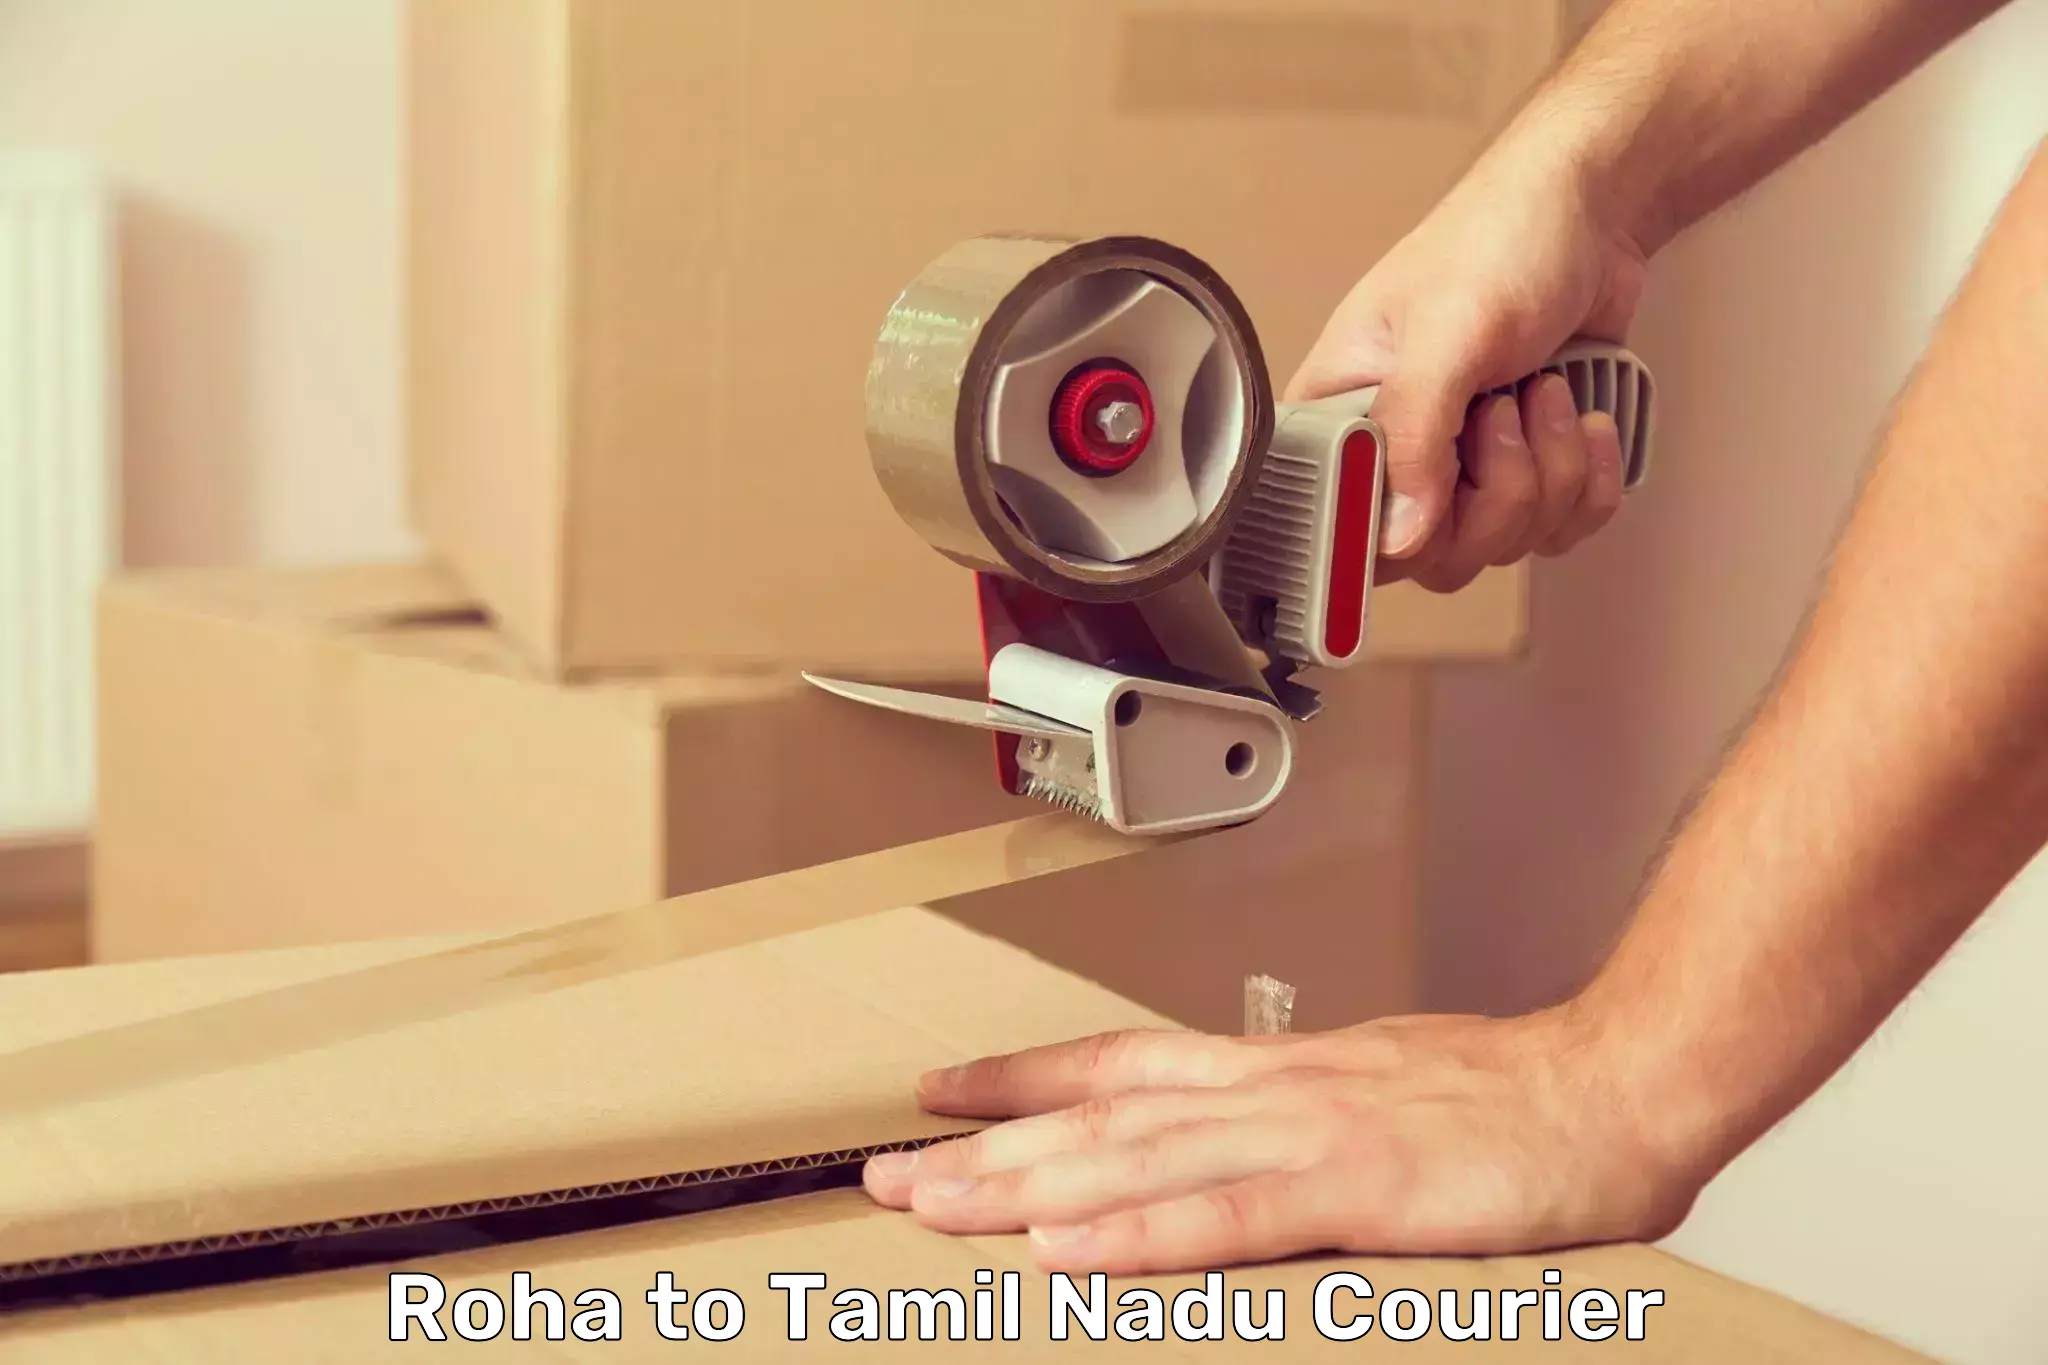 Customizable shipping options Roha to Saveetha Institute of Medical and Technical Sciences Chennai